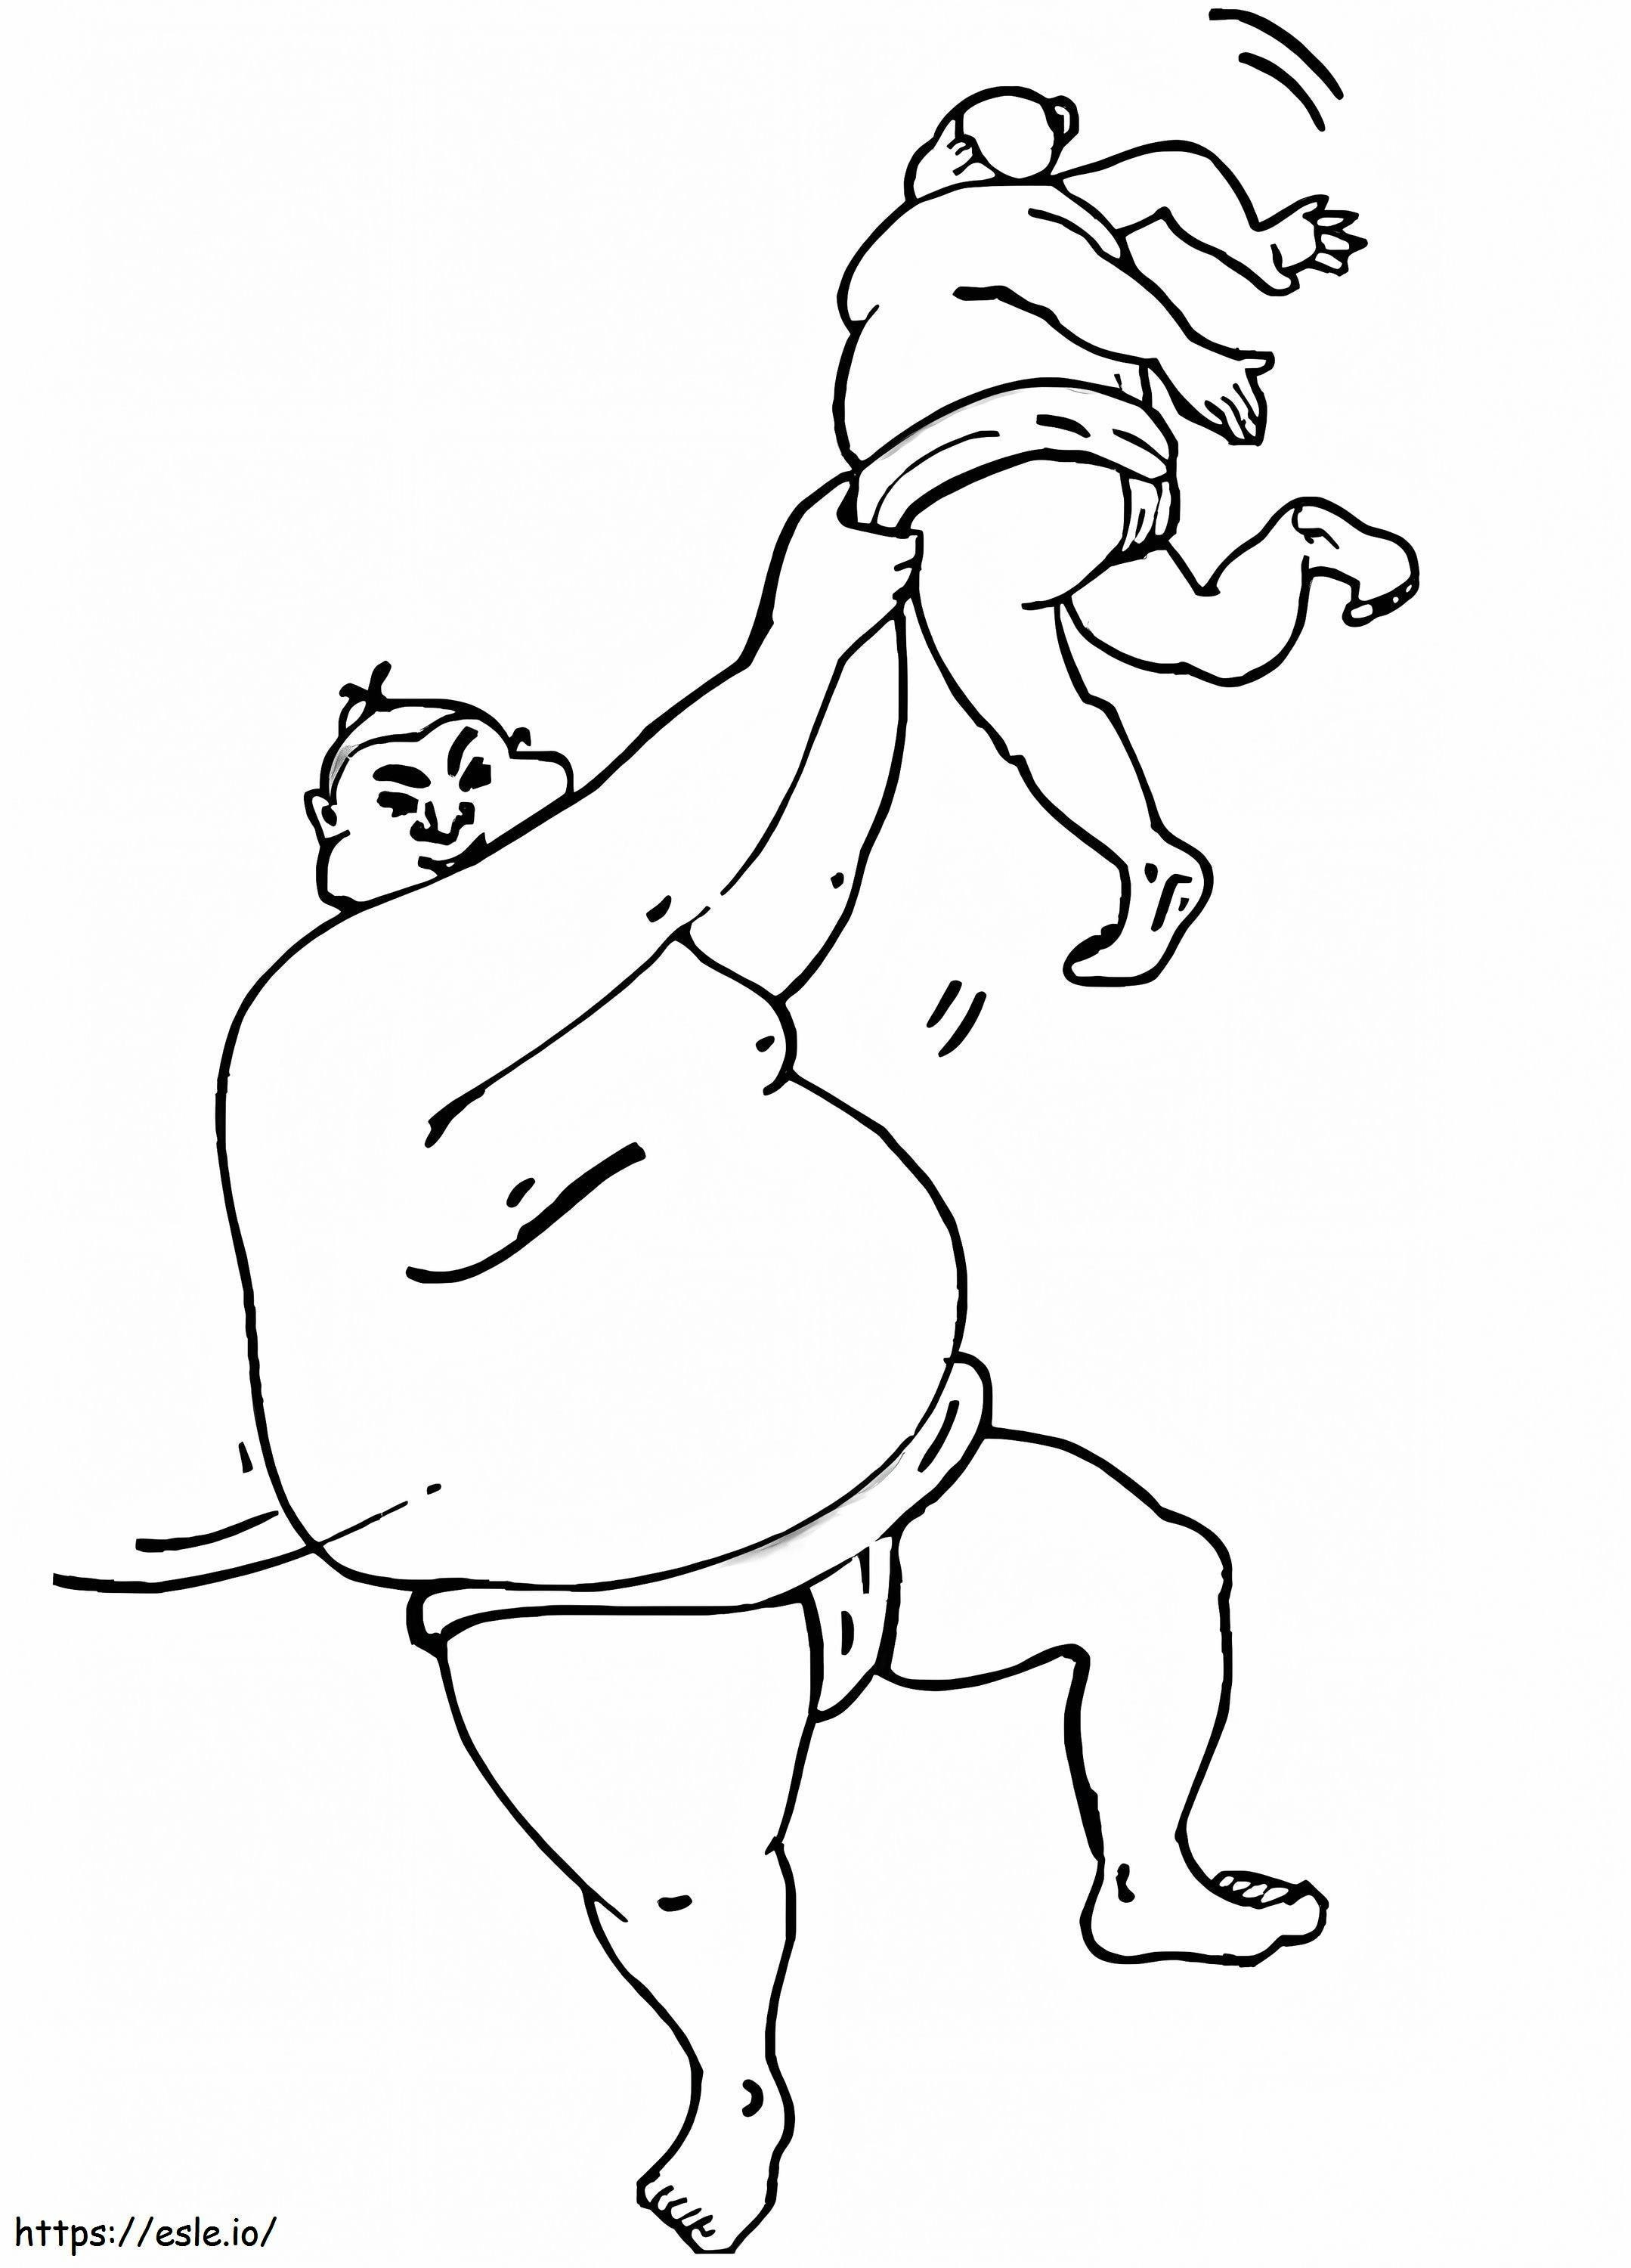 Sumo Wrestlers coloring page